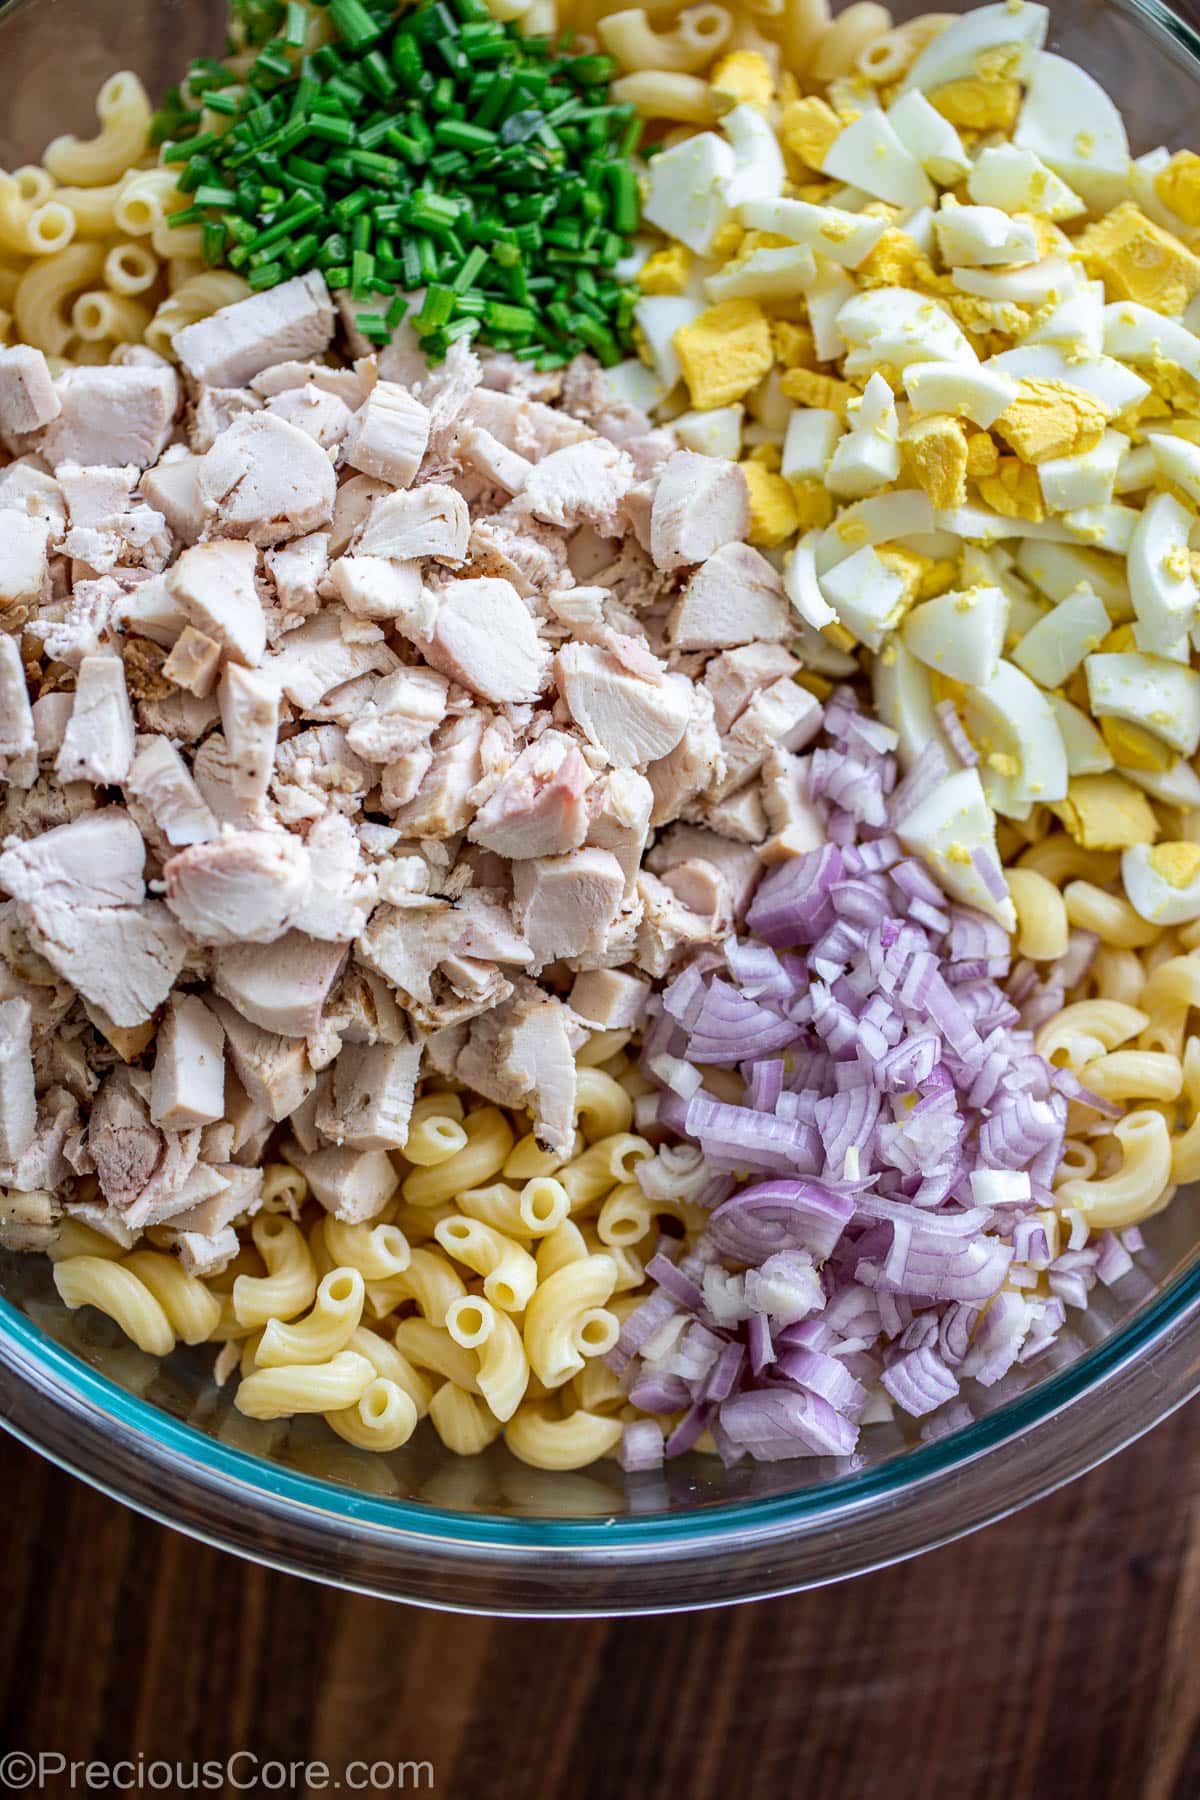 Ingredients for macaroni chicken salad in a large bowl.